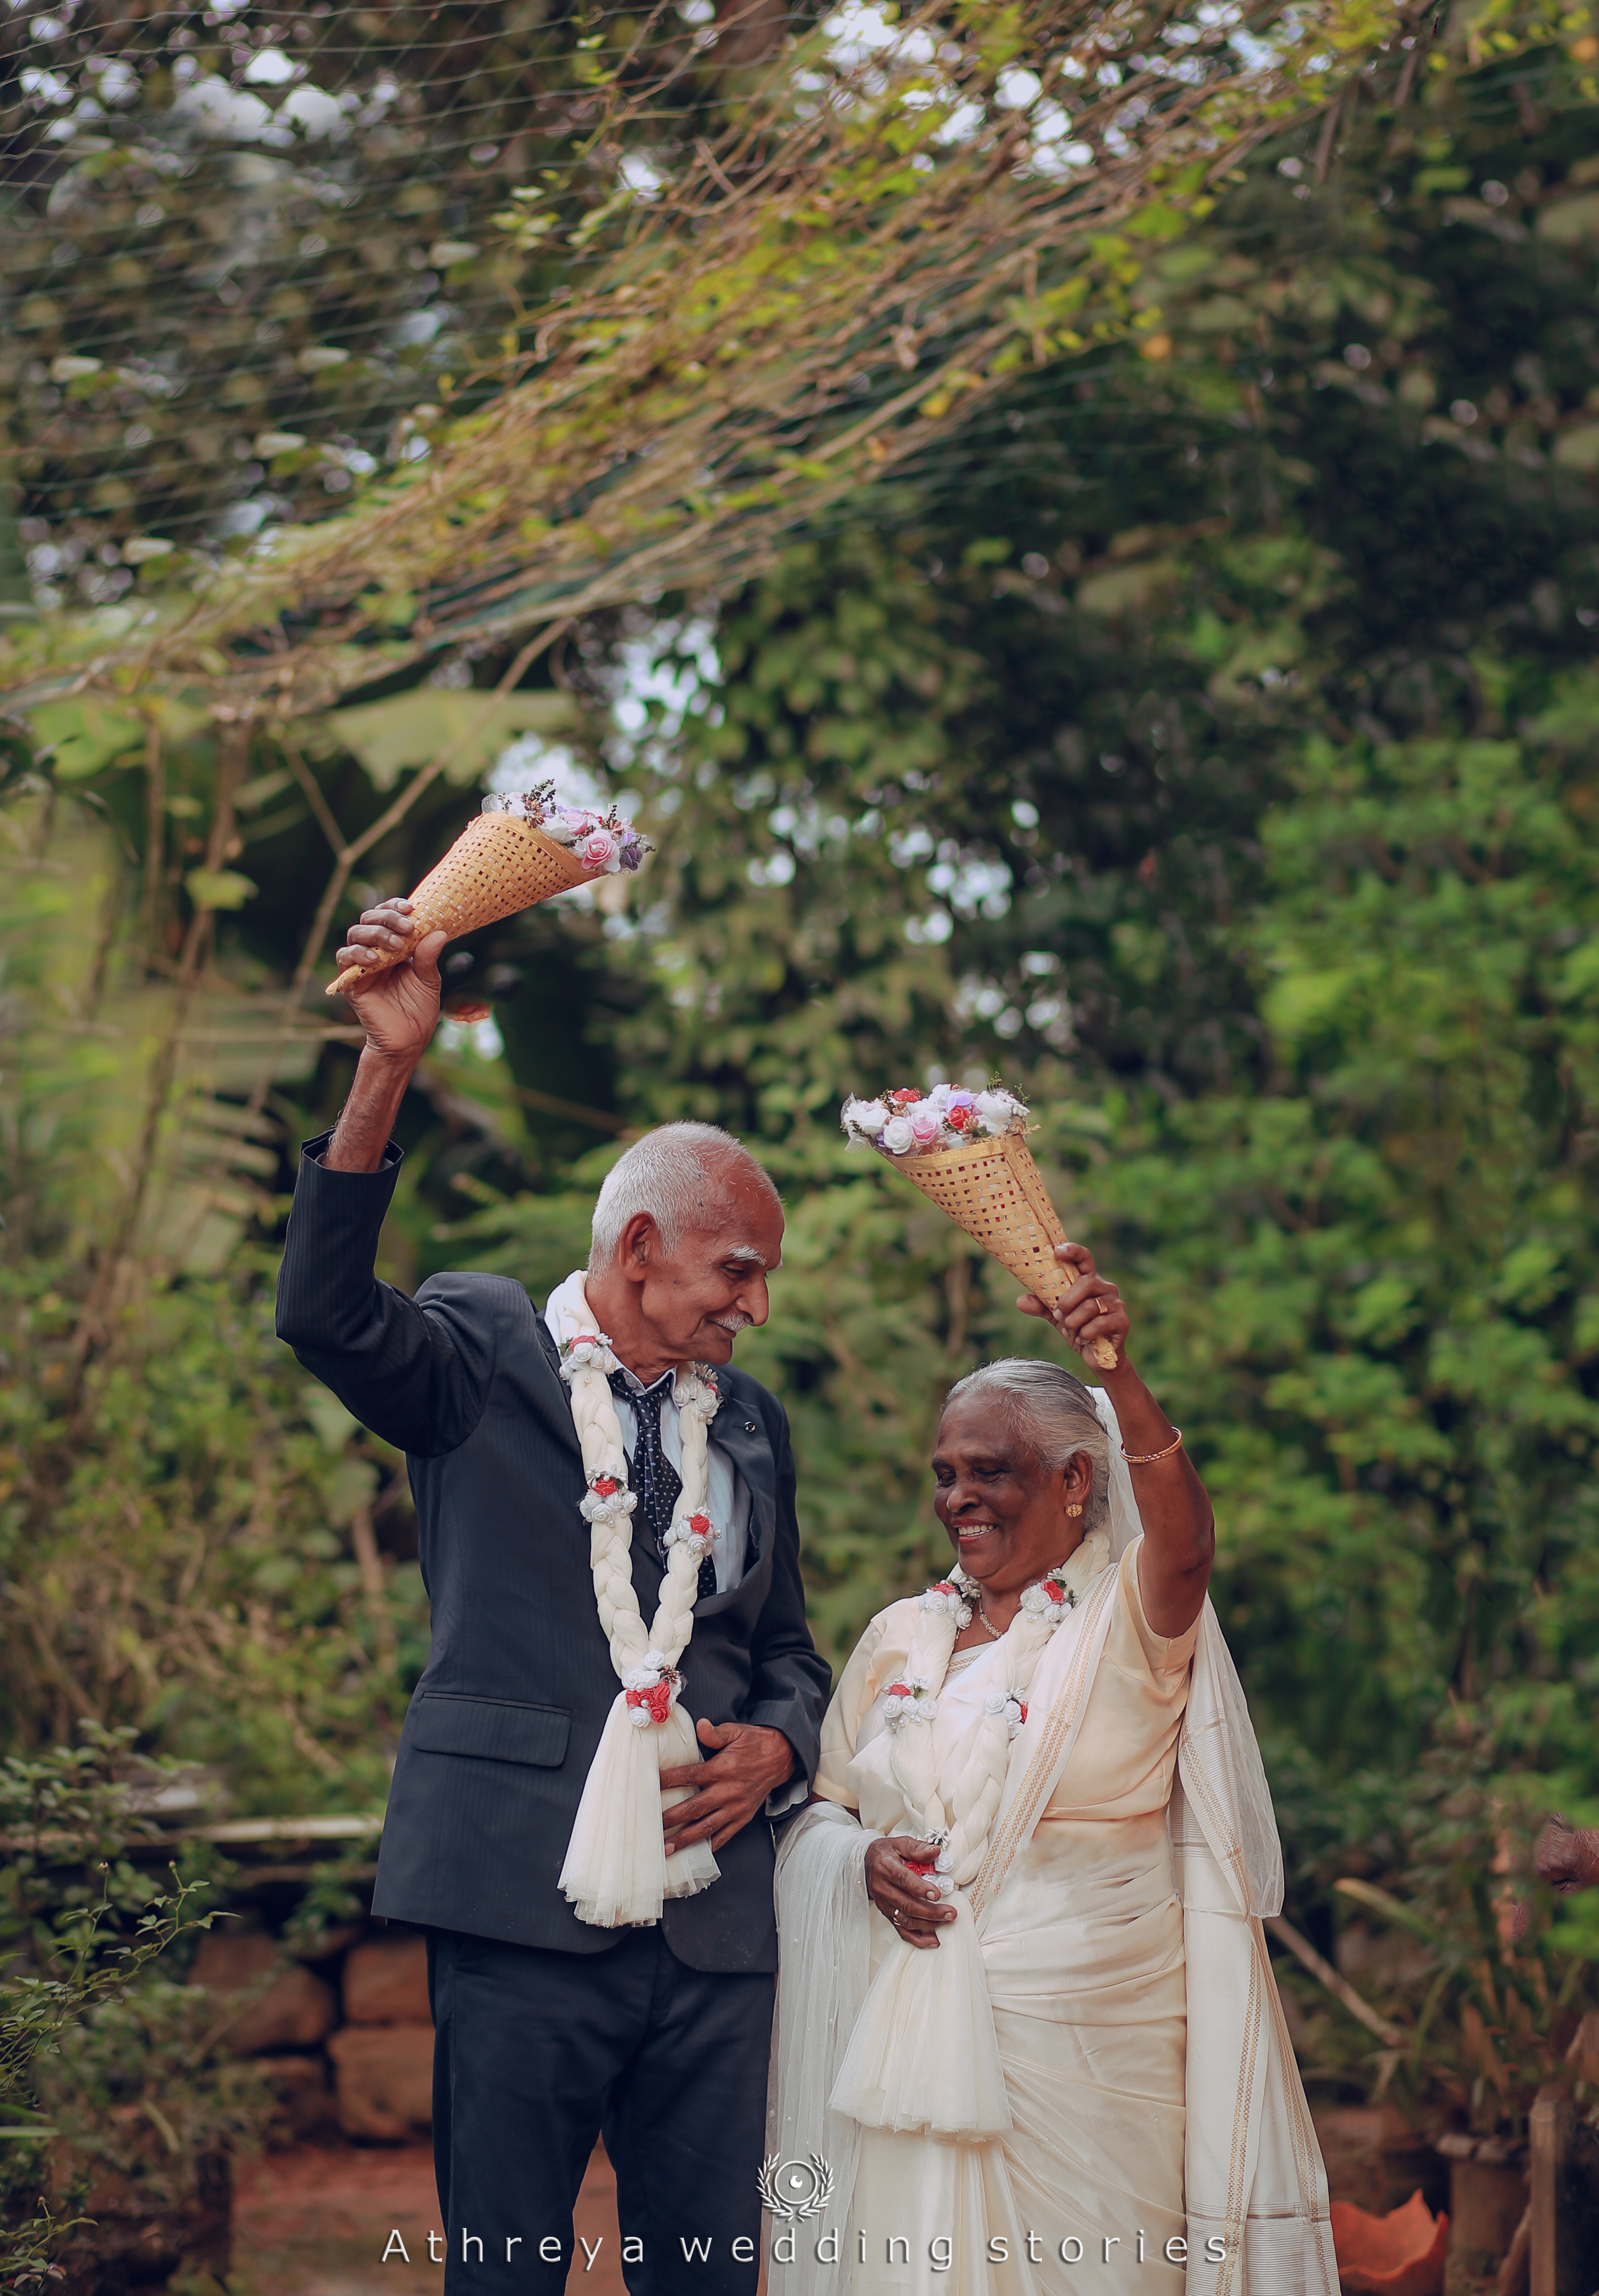 Kerala: Wedding photoshoot after 58 years of marriage goes viral